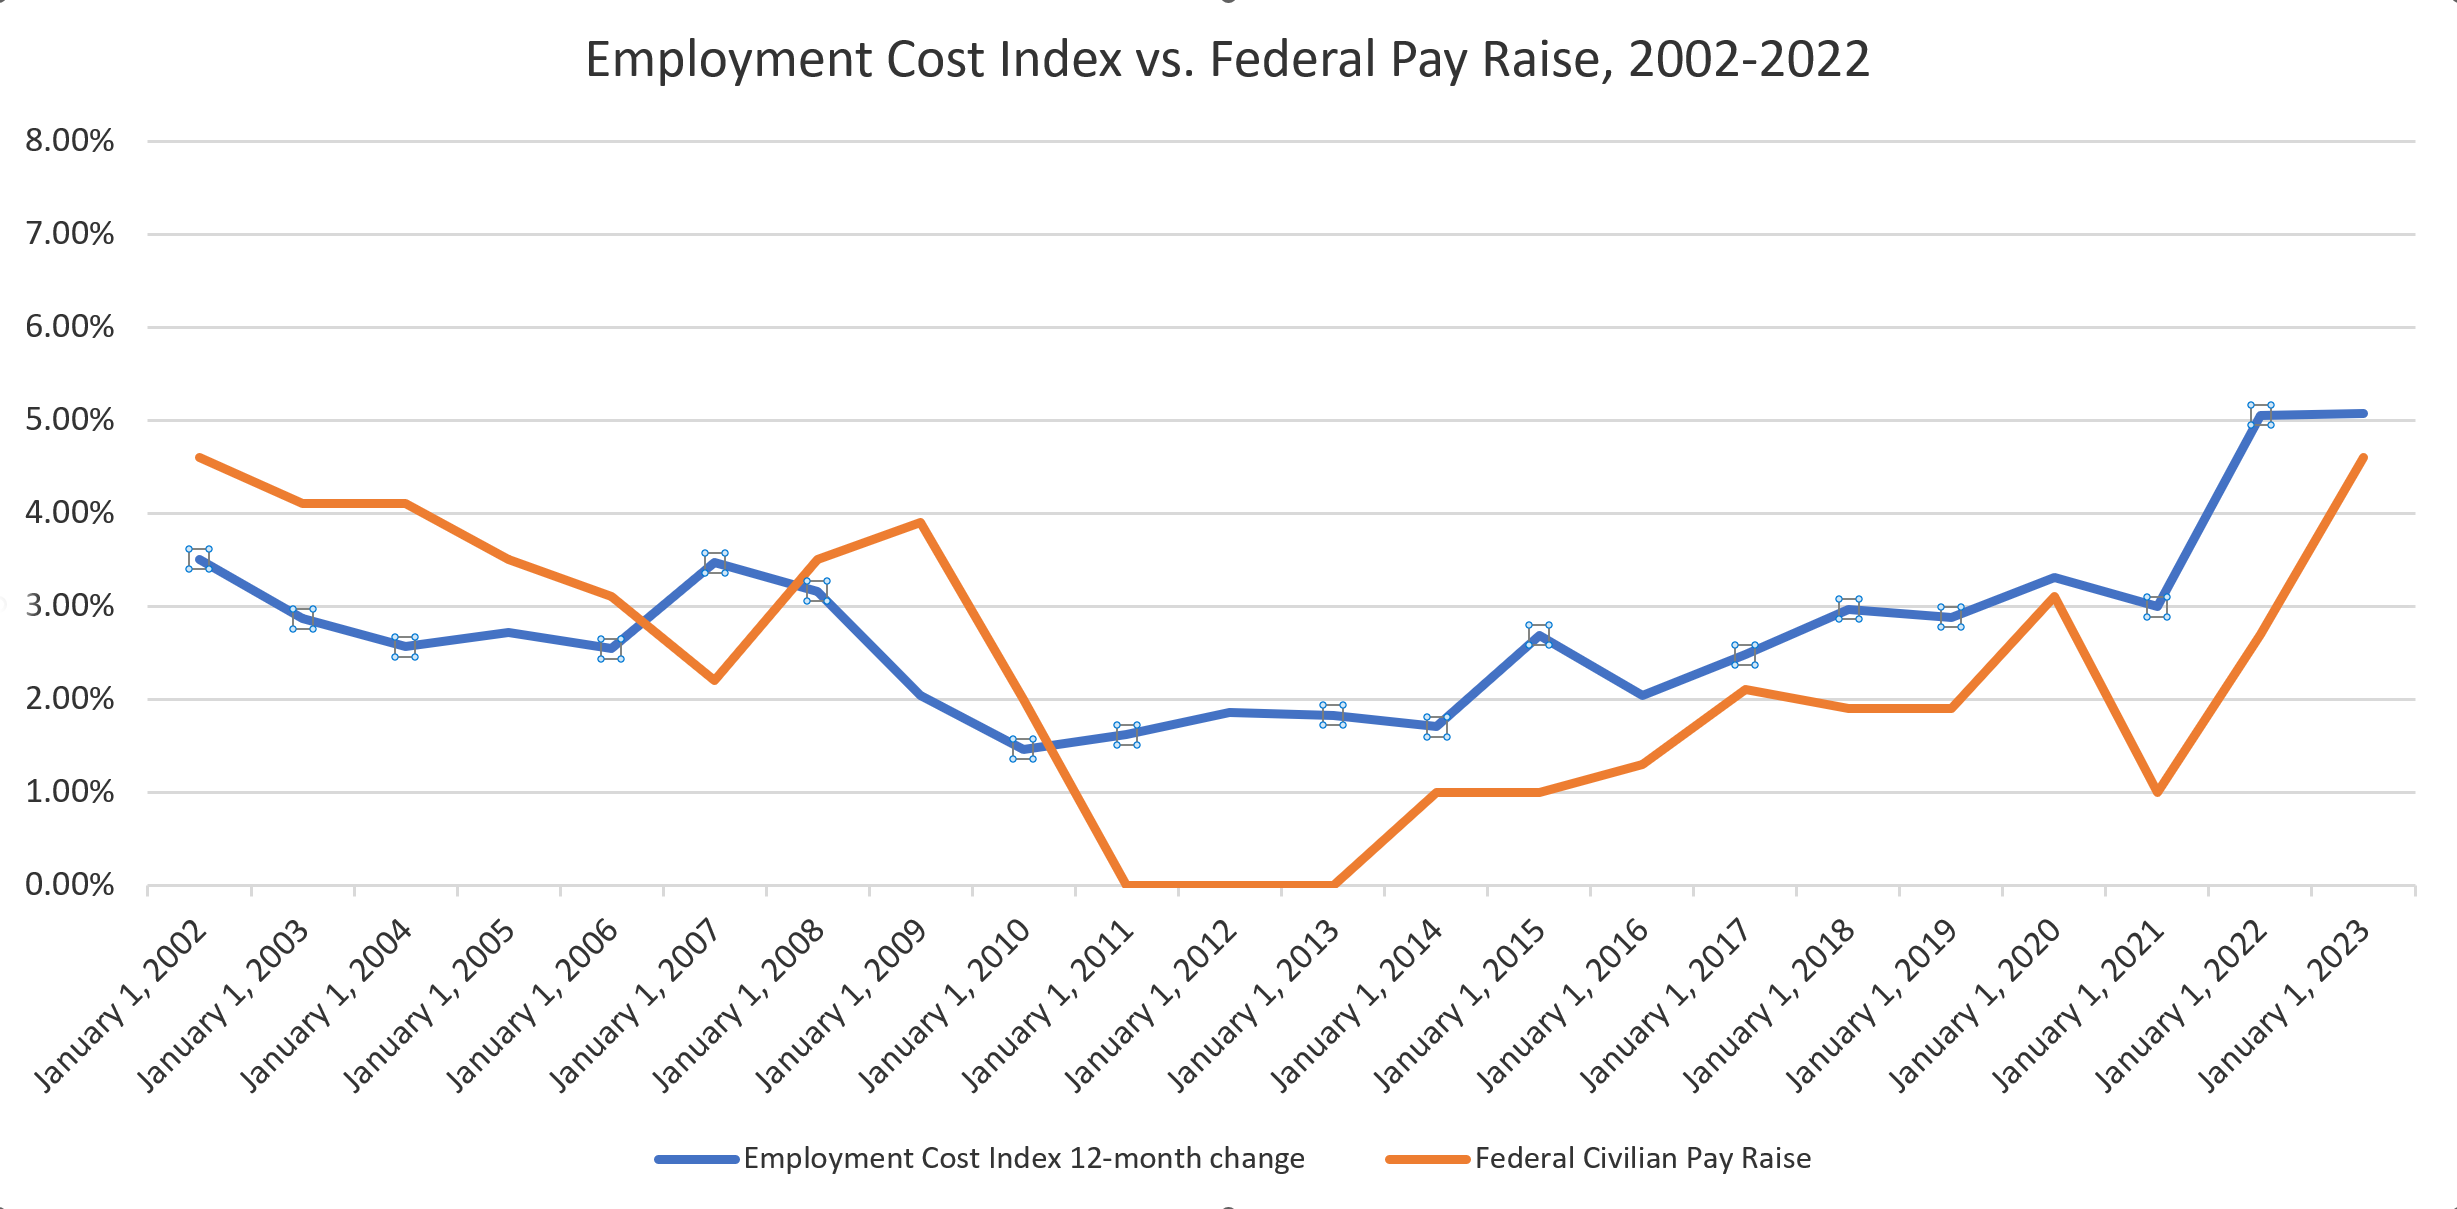 Chart: Employment Cost Index vs. Federal Civilian Pay Raise, 2002-2022